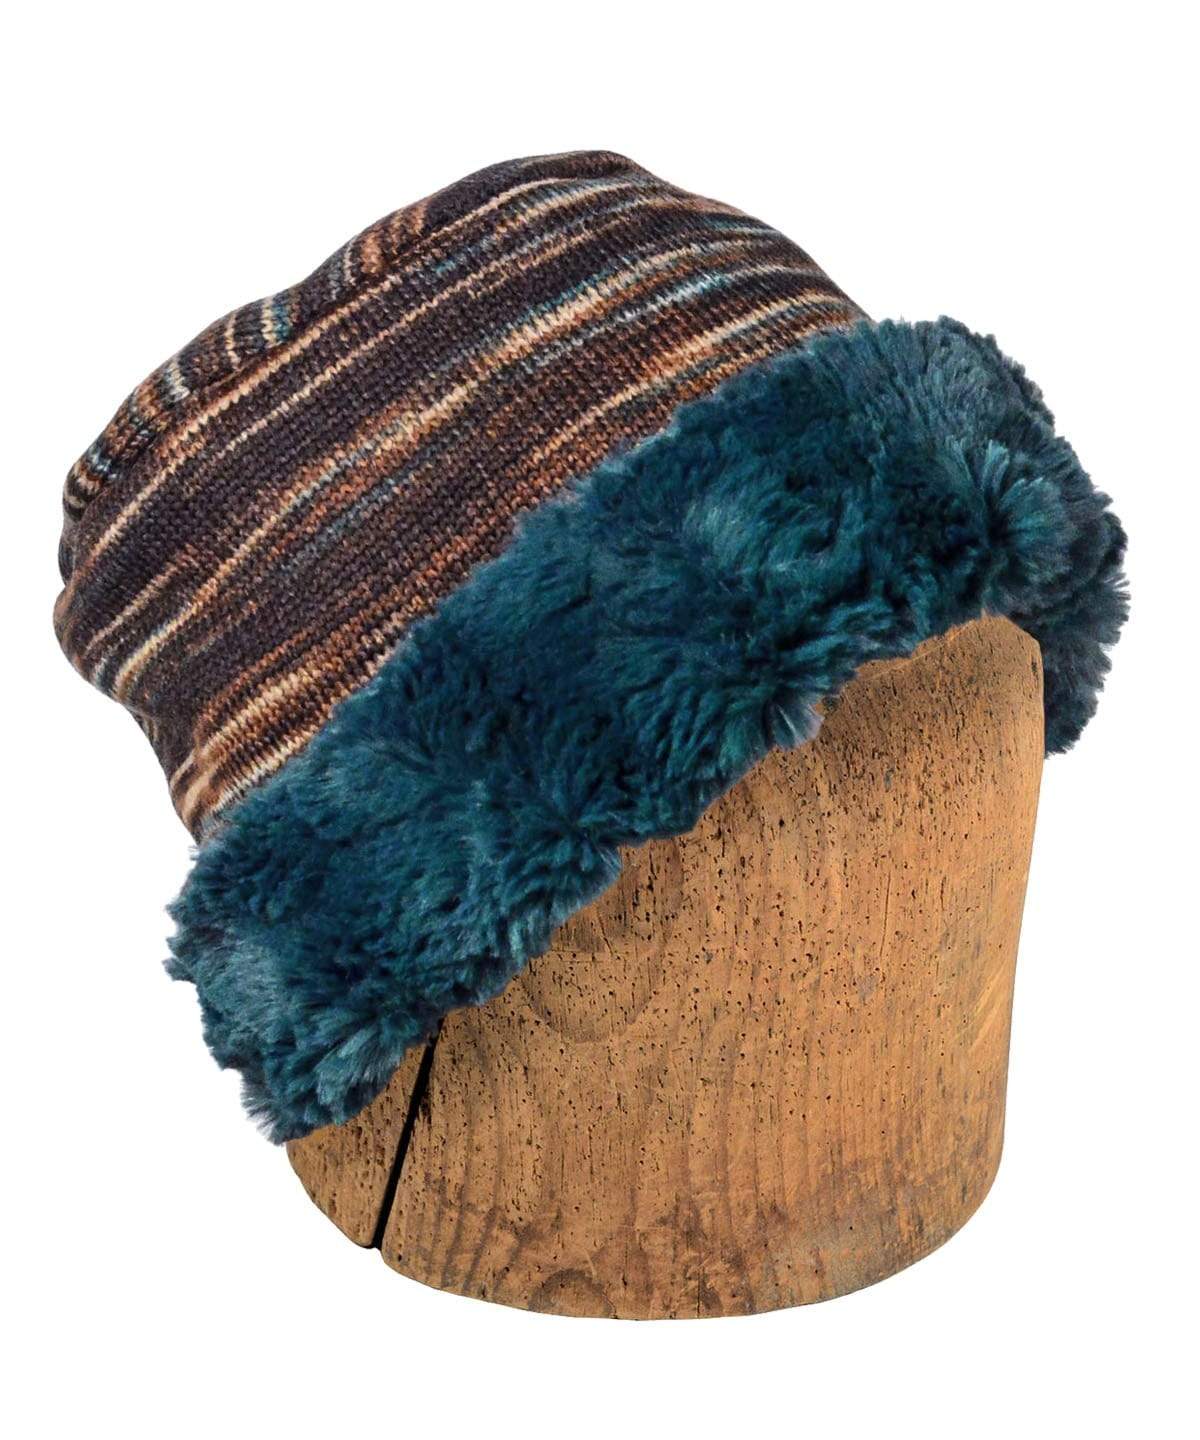 Men&#39;s Two-Tone Cuffed Pillbox | Sweet Stripes in English Toffee with Peacock Pond Teal Faux Fur | Handmade in Seattle WA by Pandemonium Millinery USA